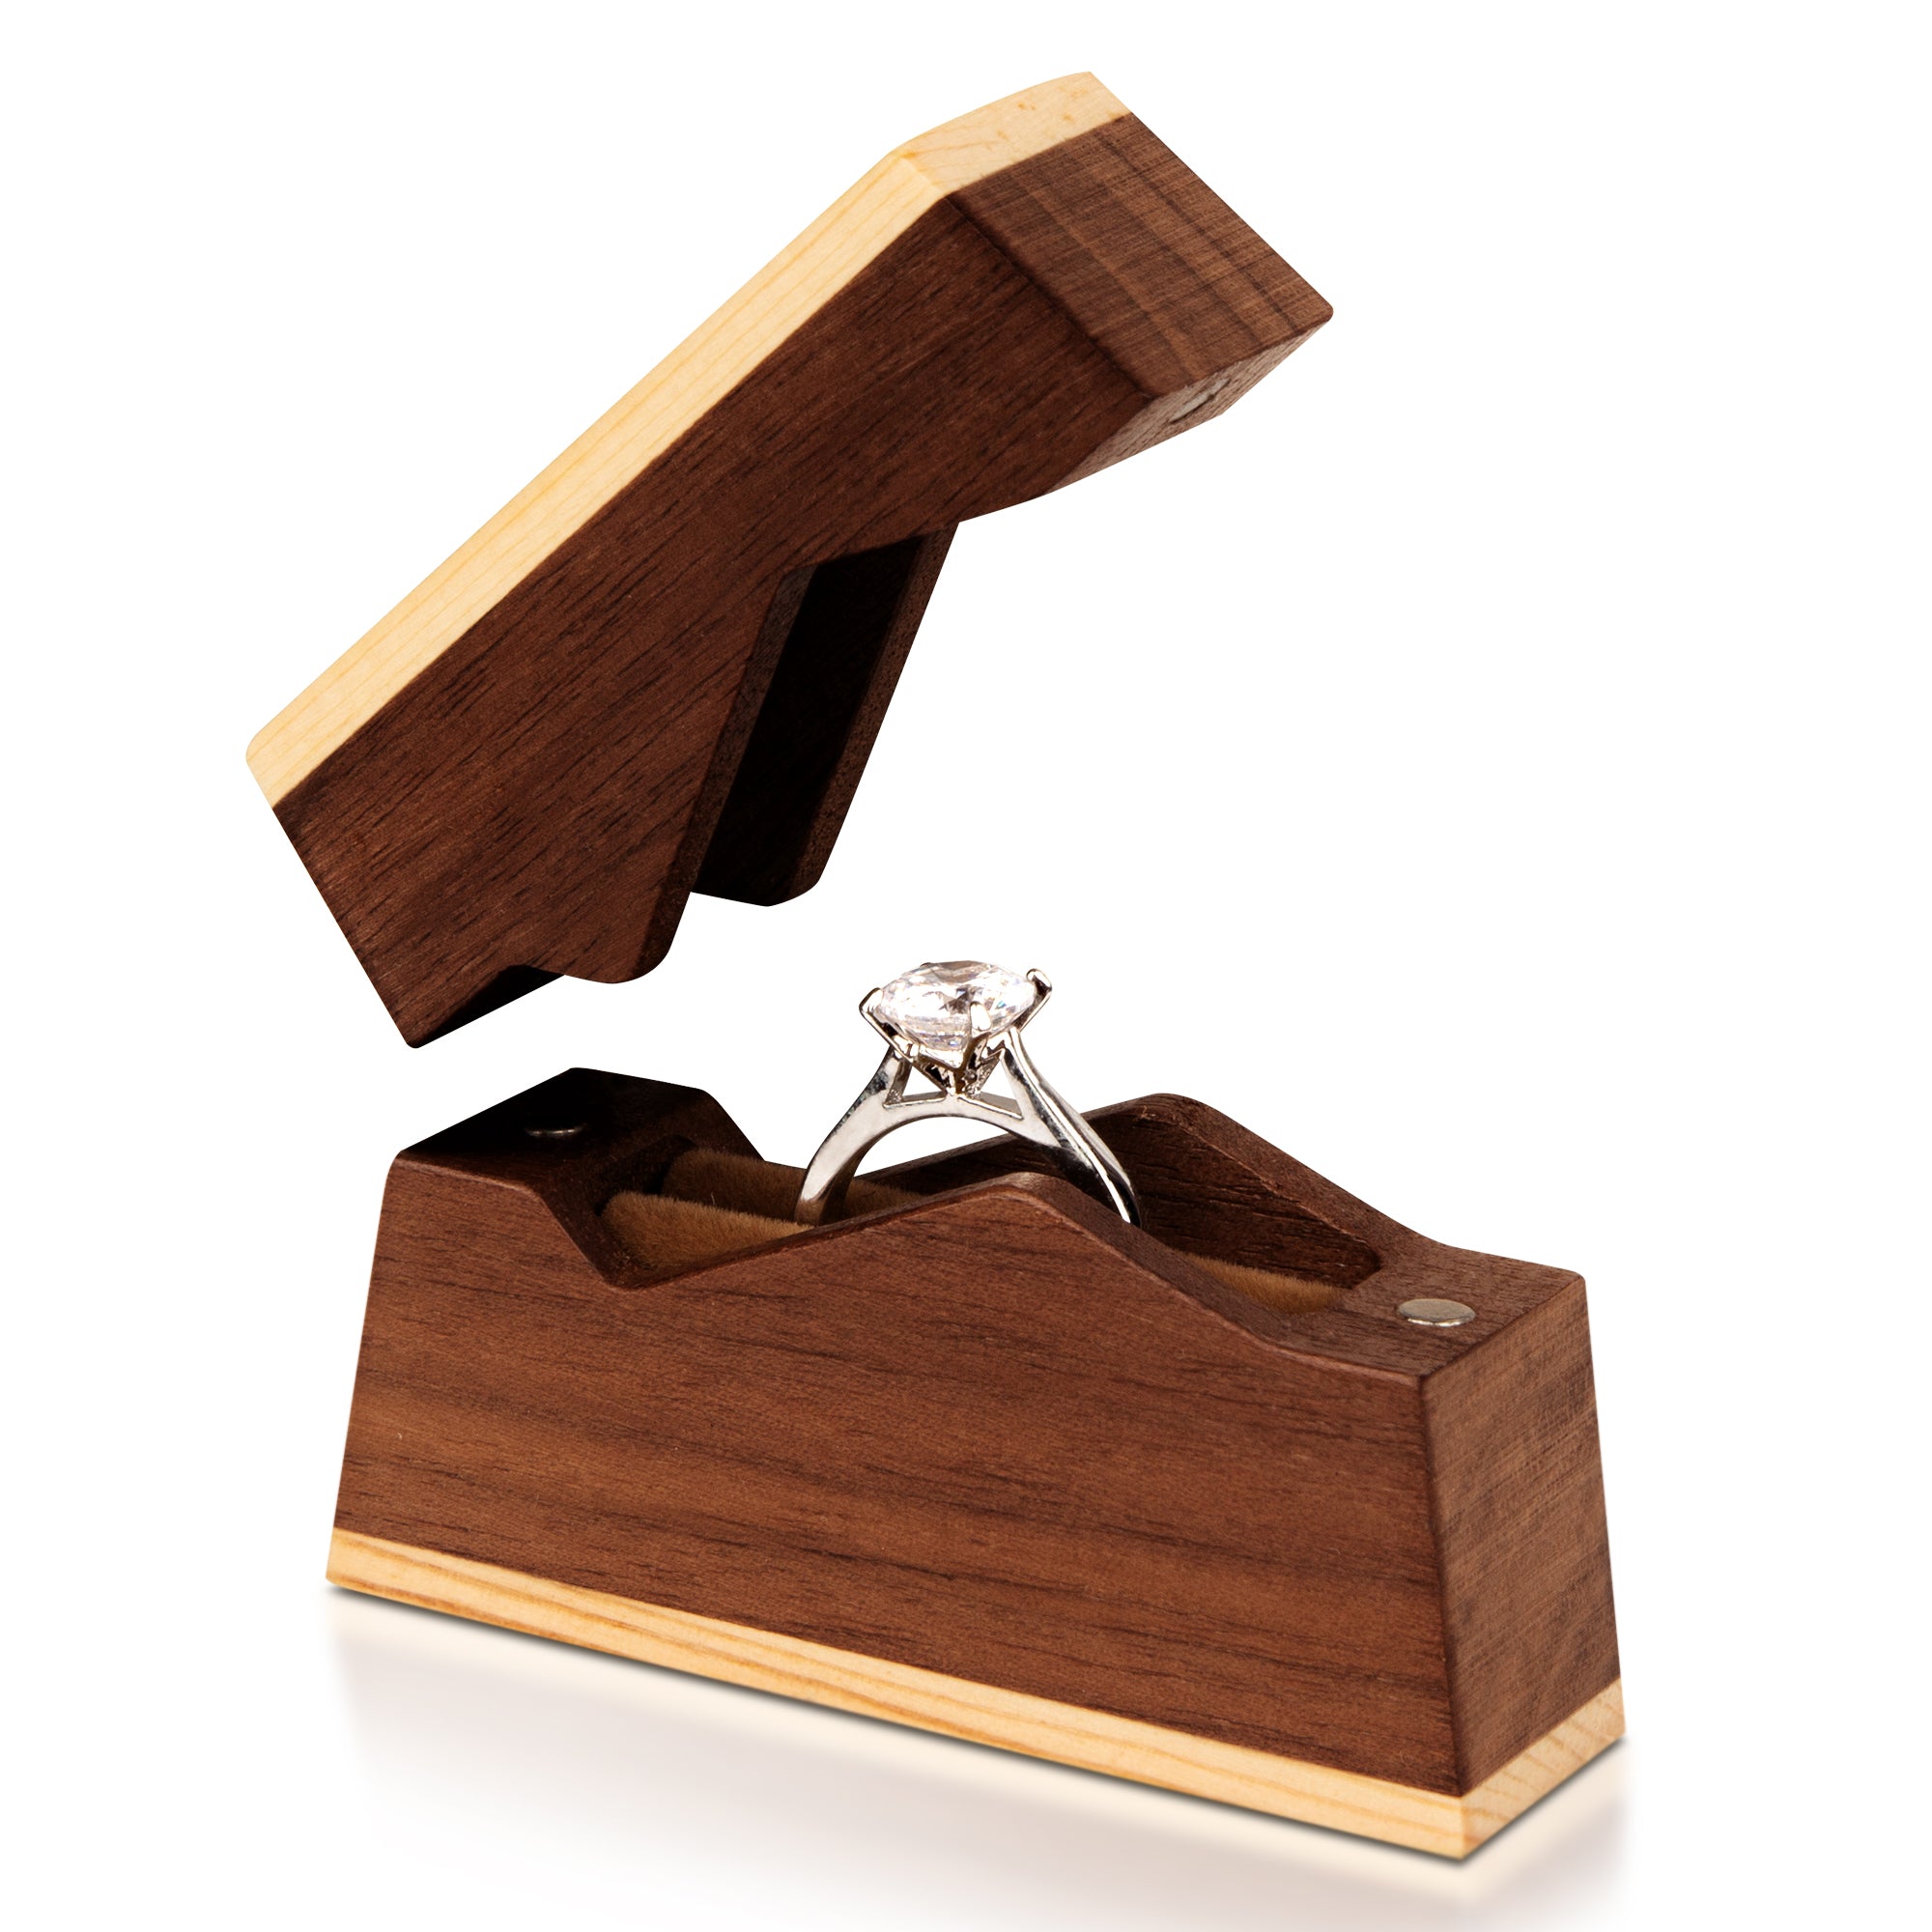 Engagement Ring Box For Proposal - Walnut Wood